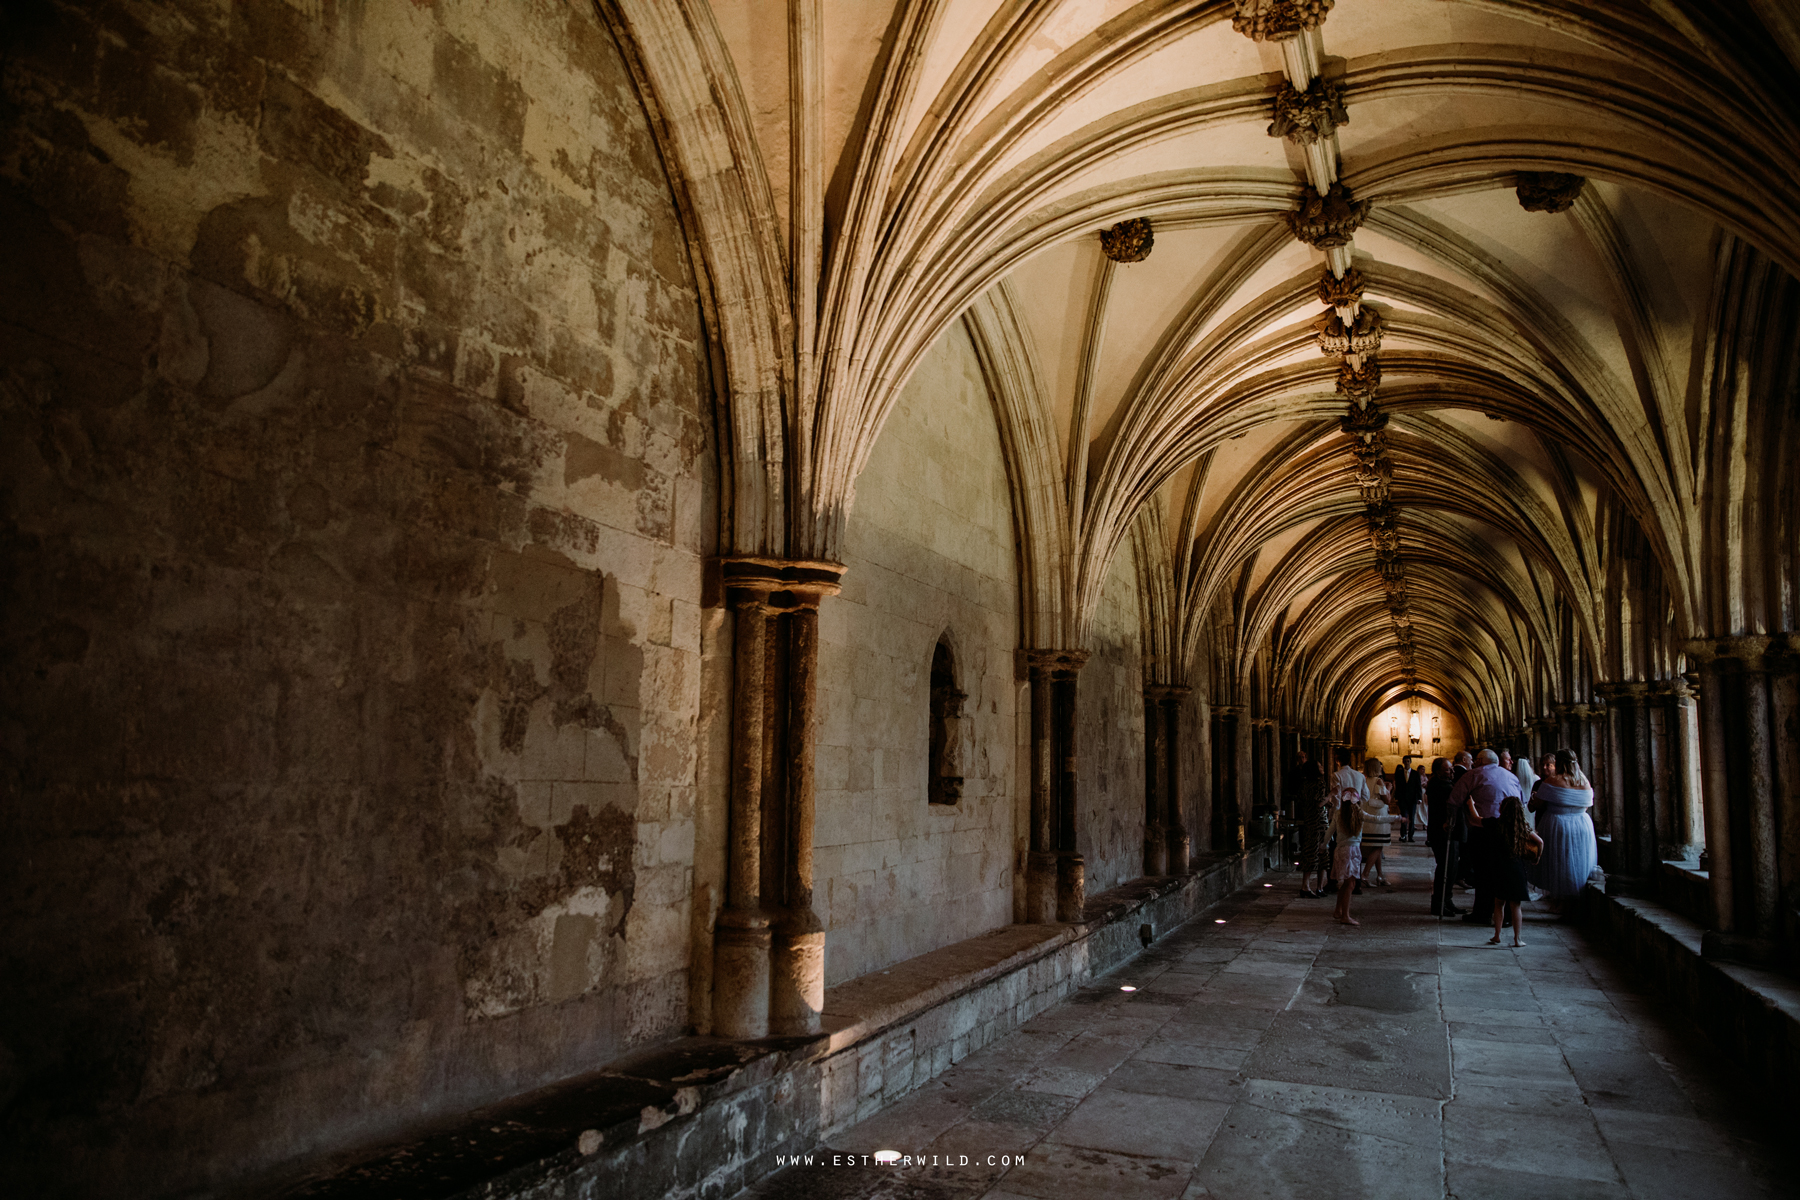 Norwich_Castle_Arcade_Grosvenor_Chip_Birdcage_Cathedral_Cloisters_Refectory_Wedding_Photography_Esther_Wild_Photographer_Norfolk_Kings_Lynn_3R8A3132.jpg